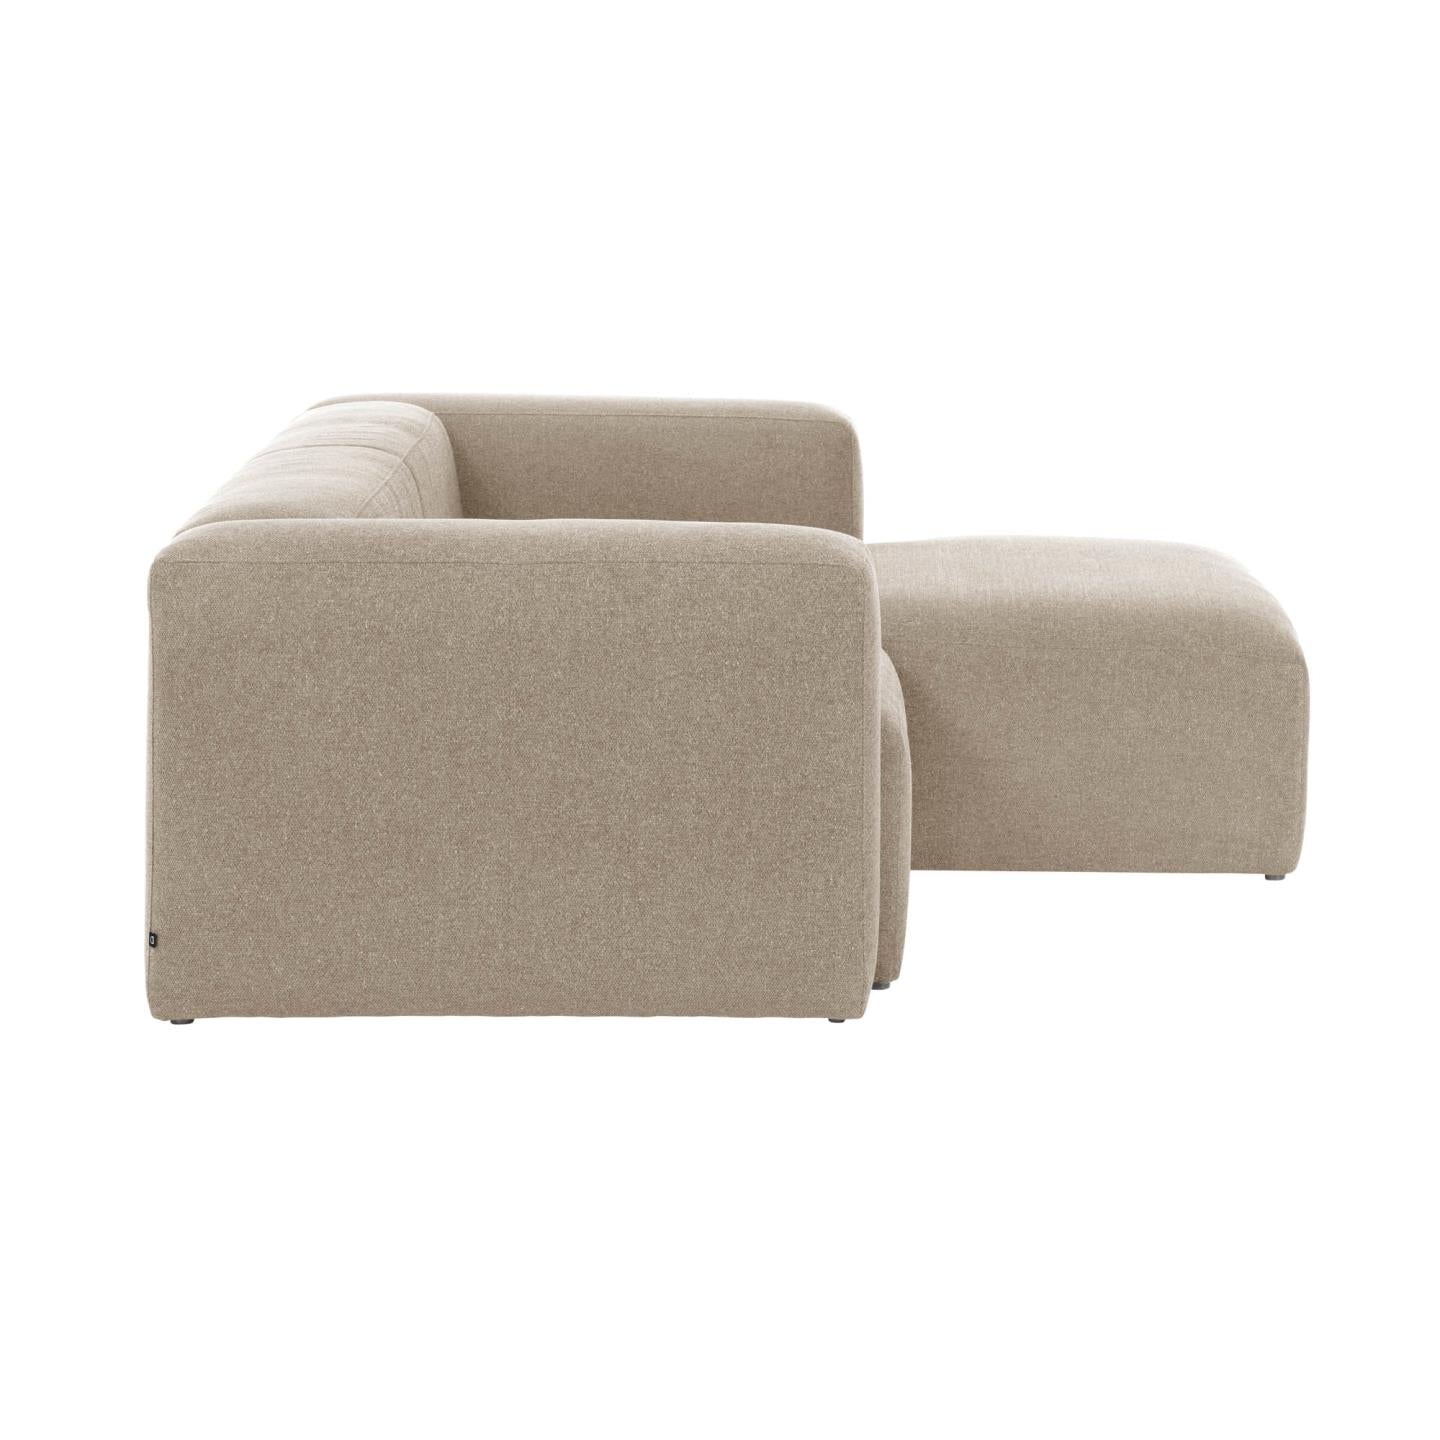 Bloka 2 seater sofa with right-hand chaise longue in beige, 240 cm